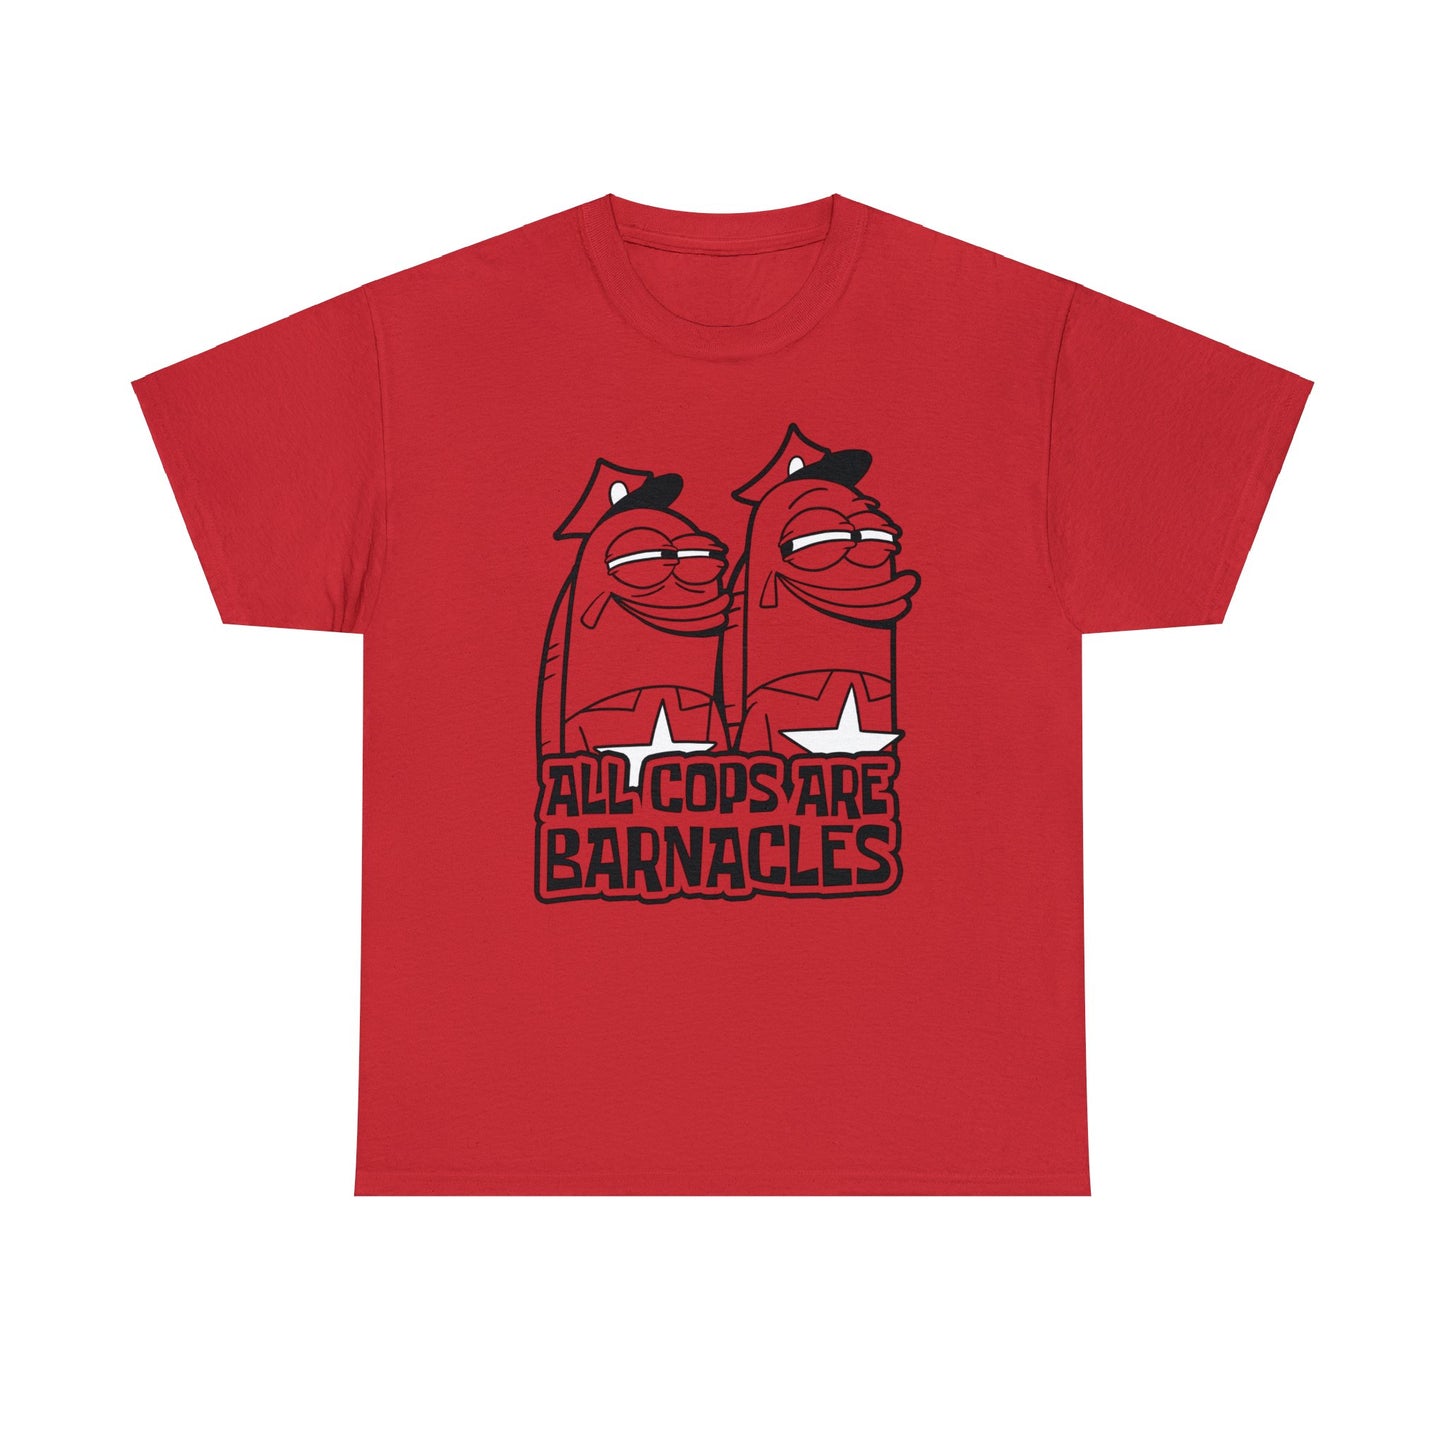 All Cops Are Barnacles 2.0 t-shirt